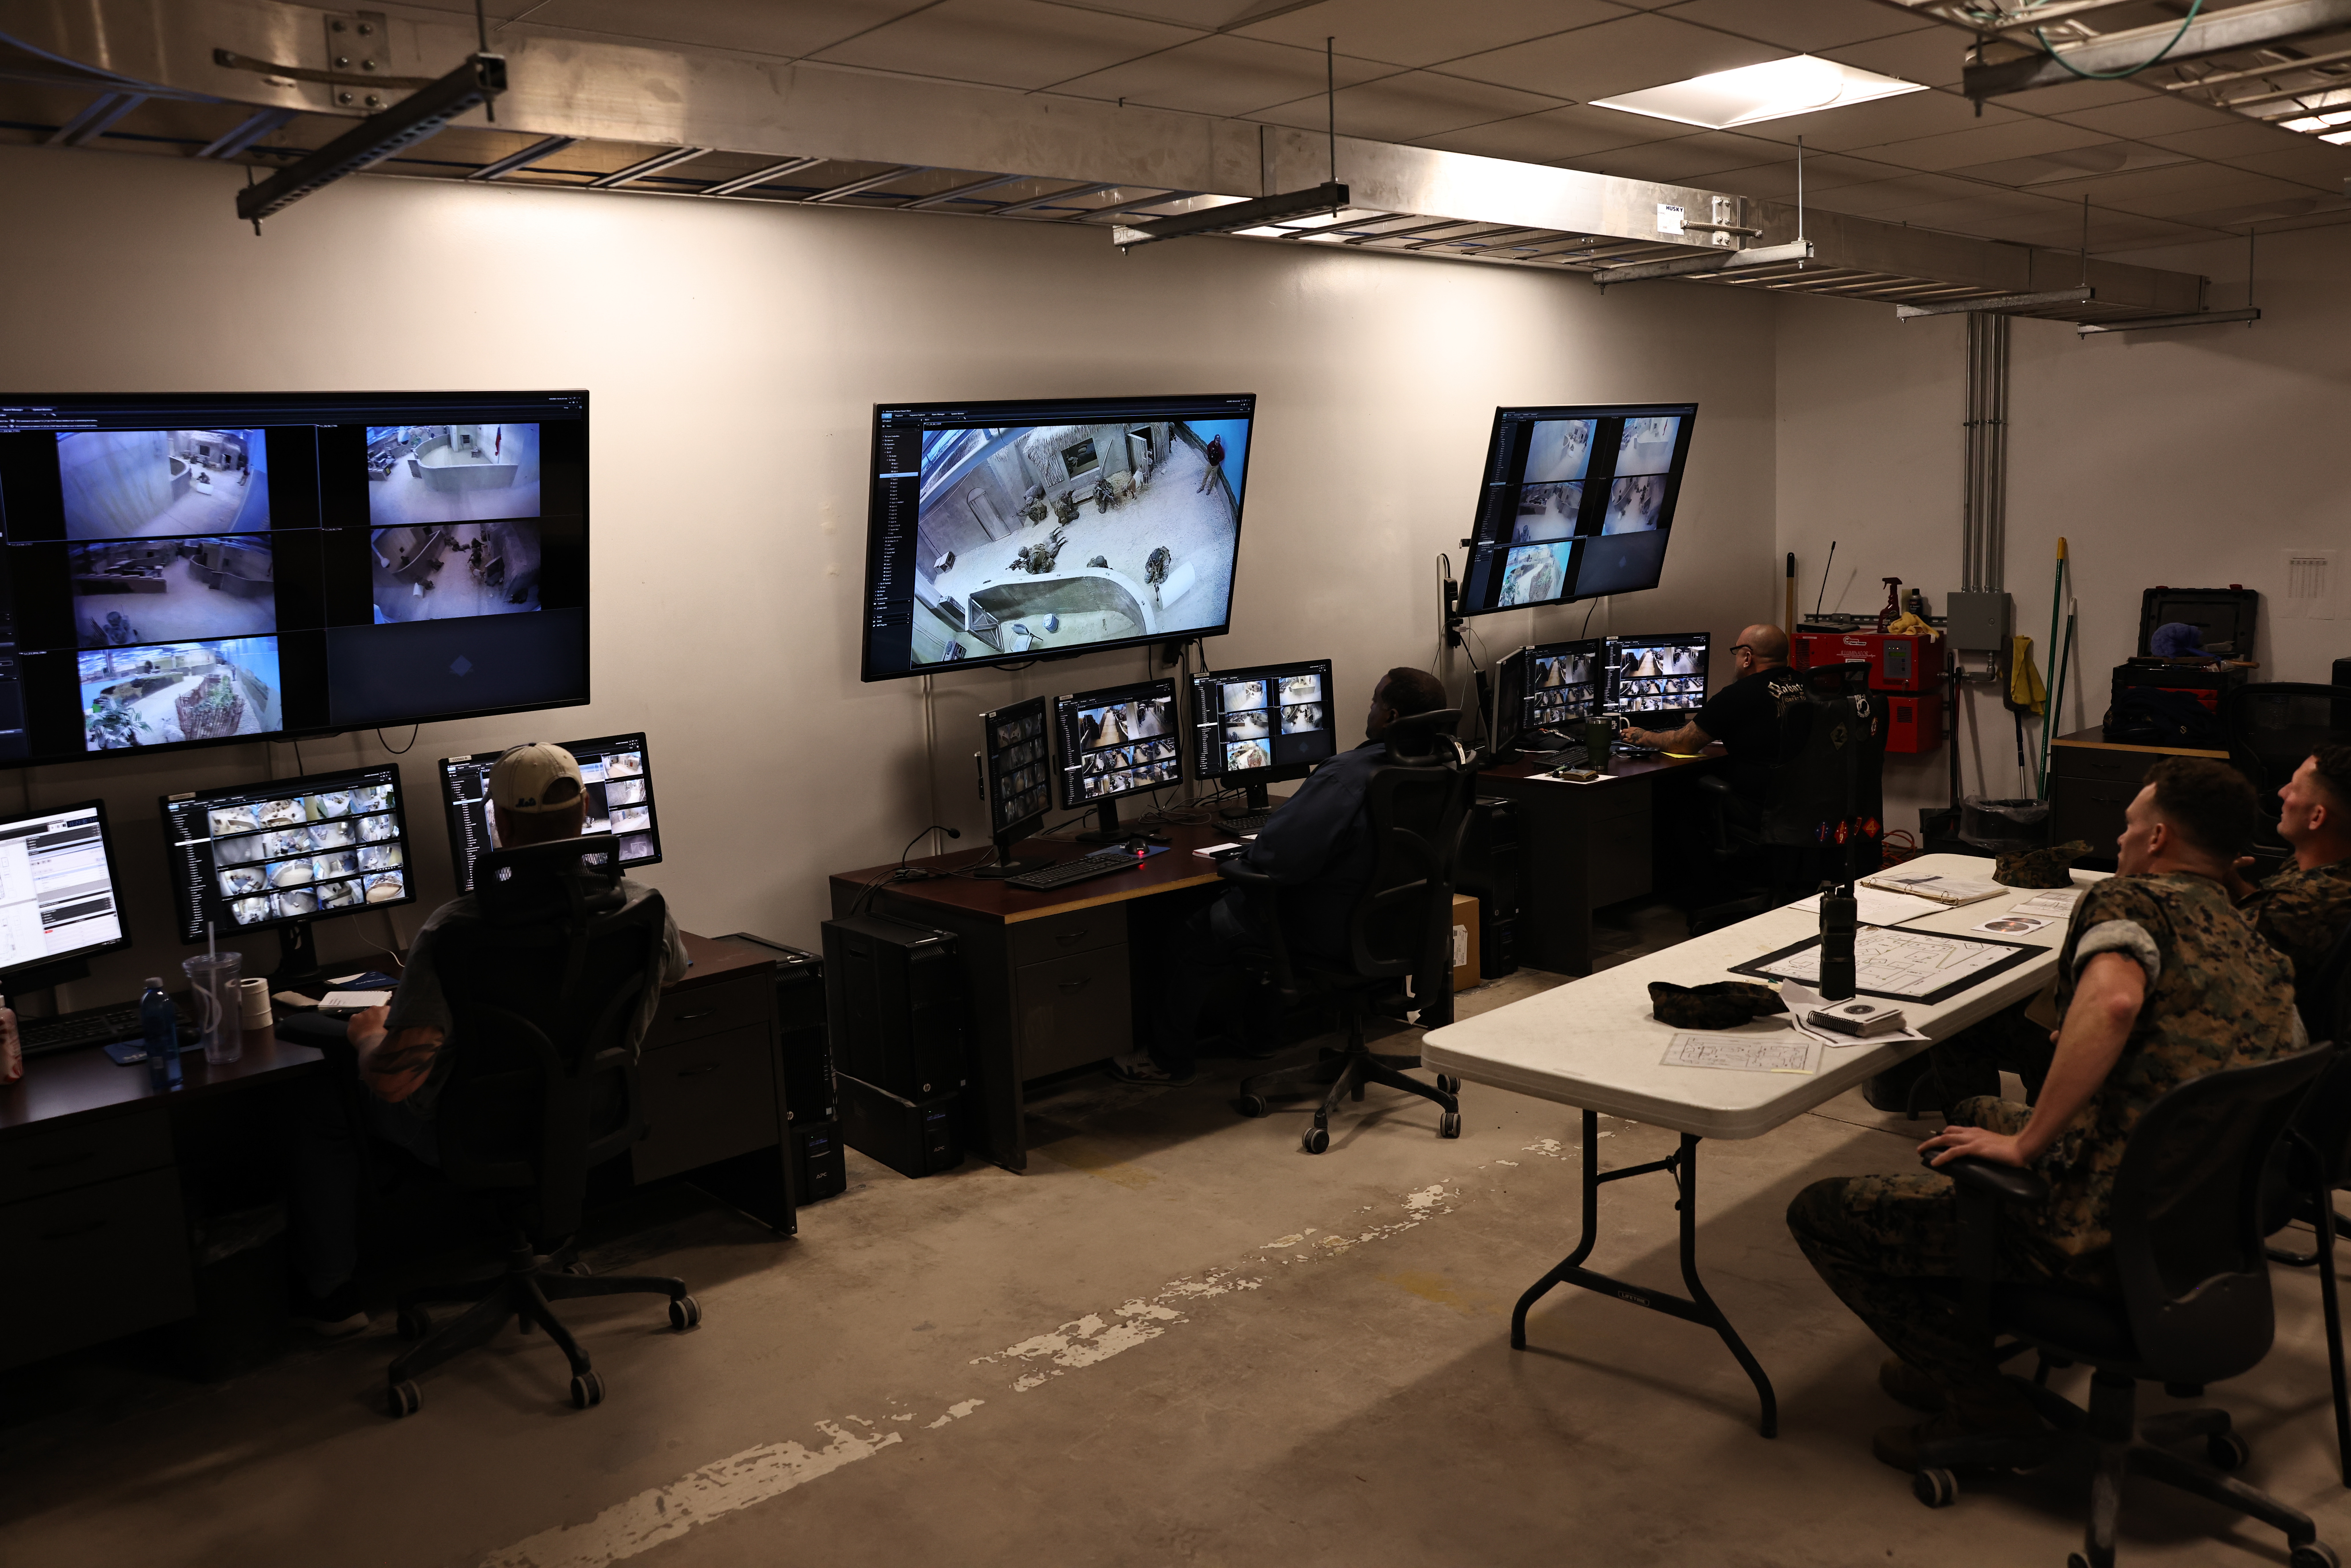 Marines in a camera room with multiple monitors on the wall.